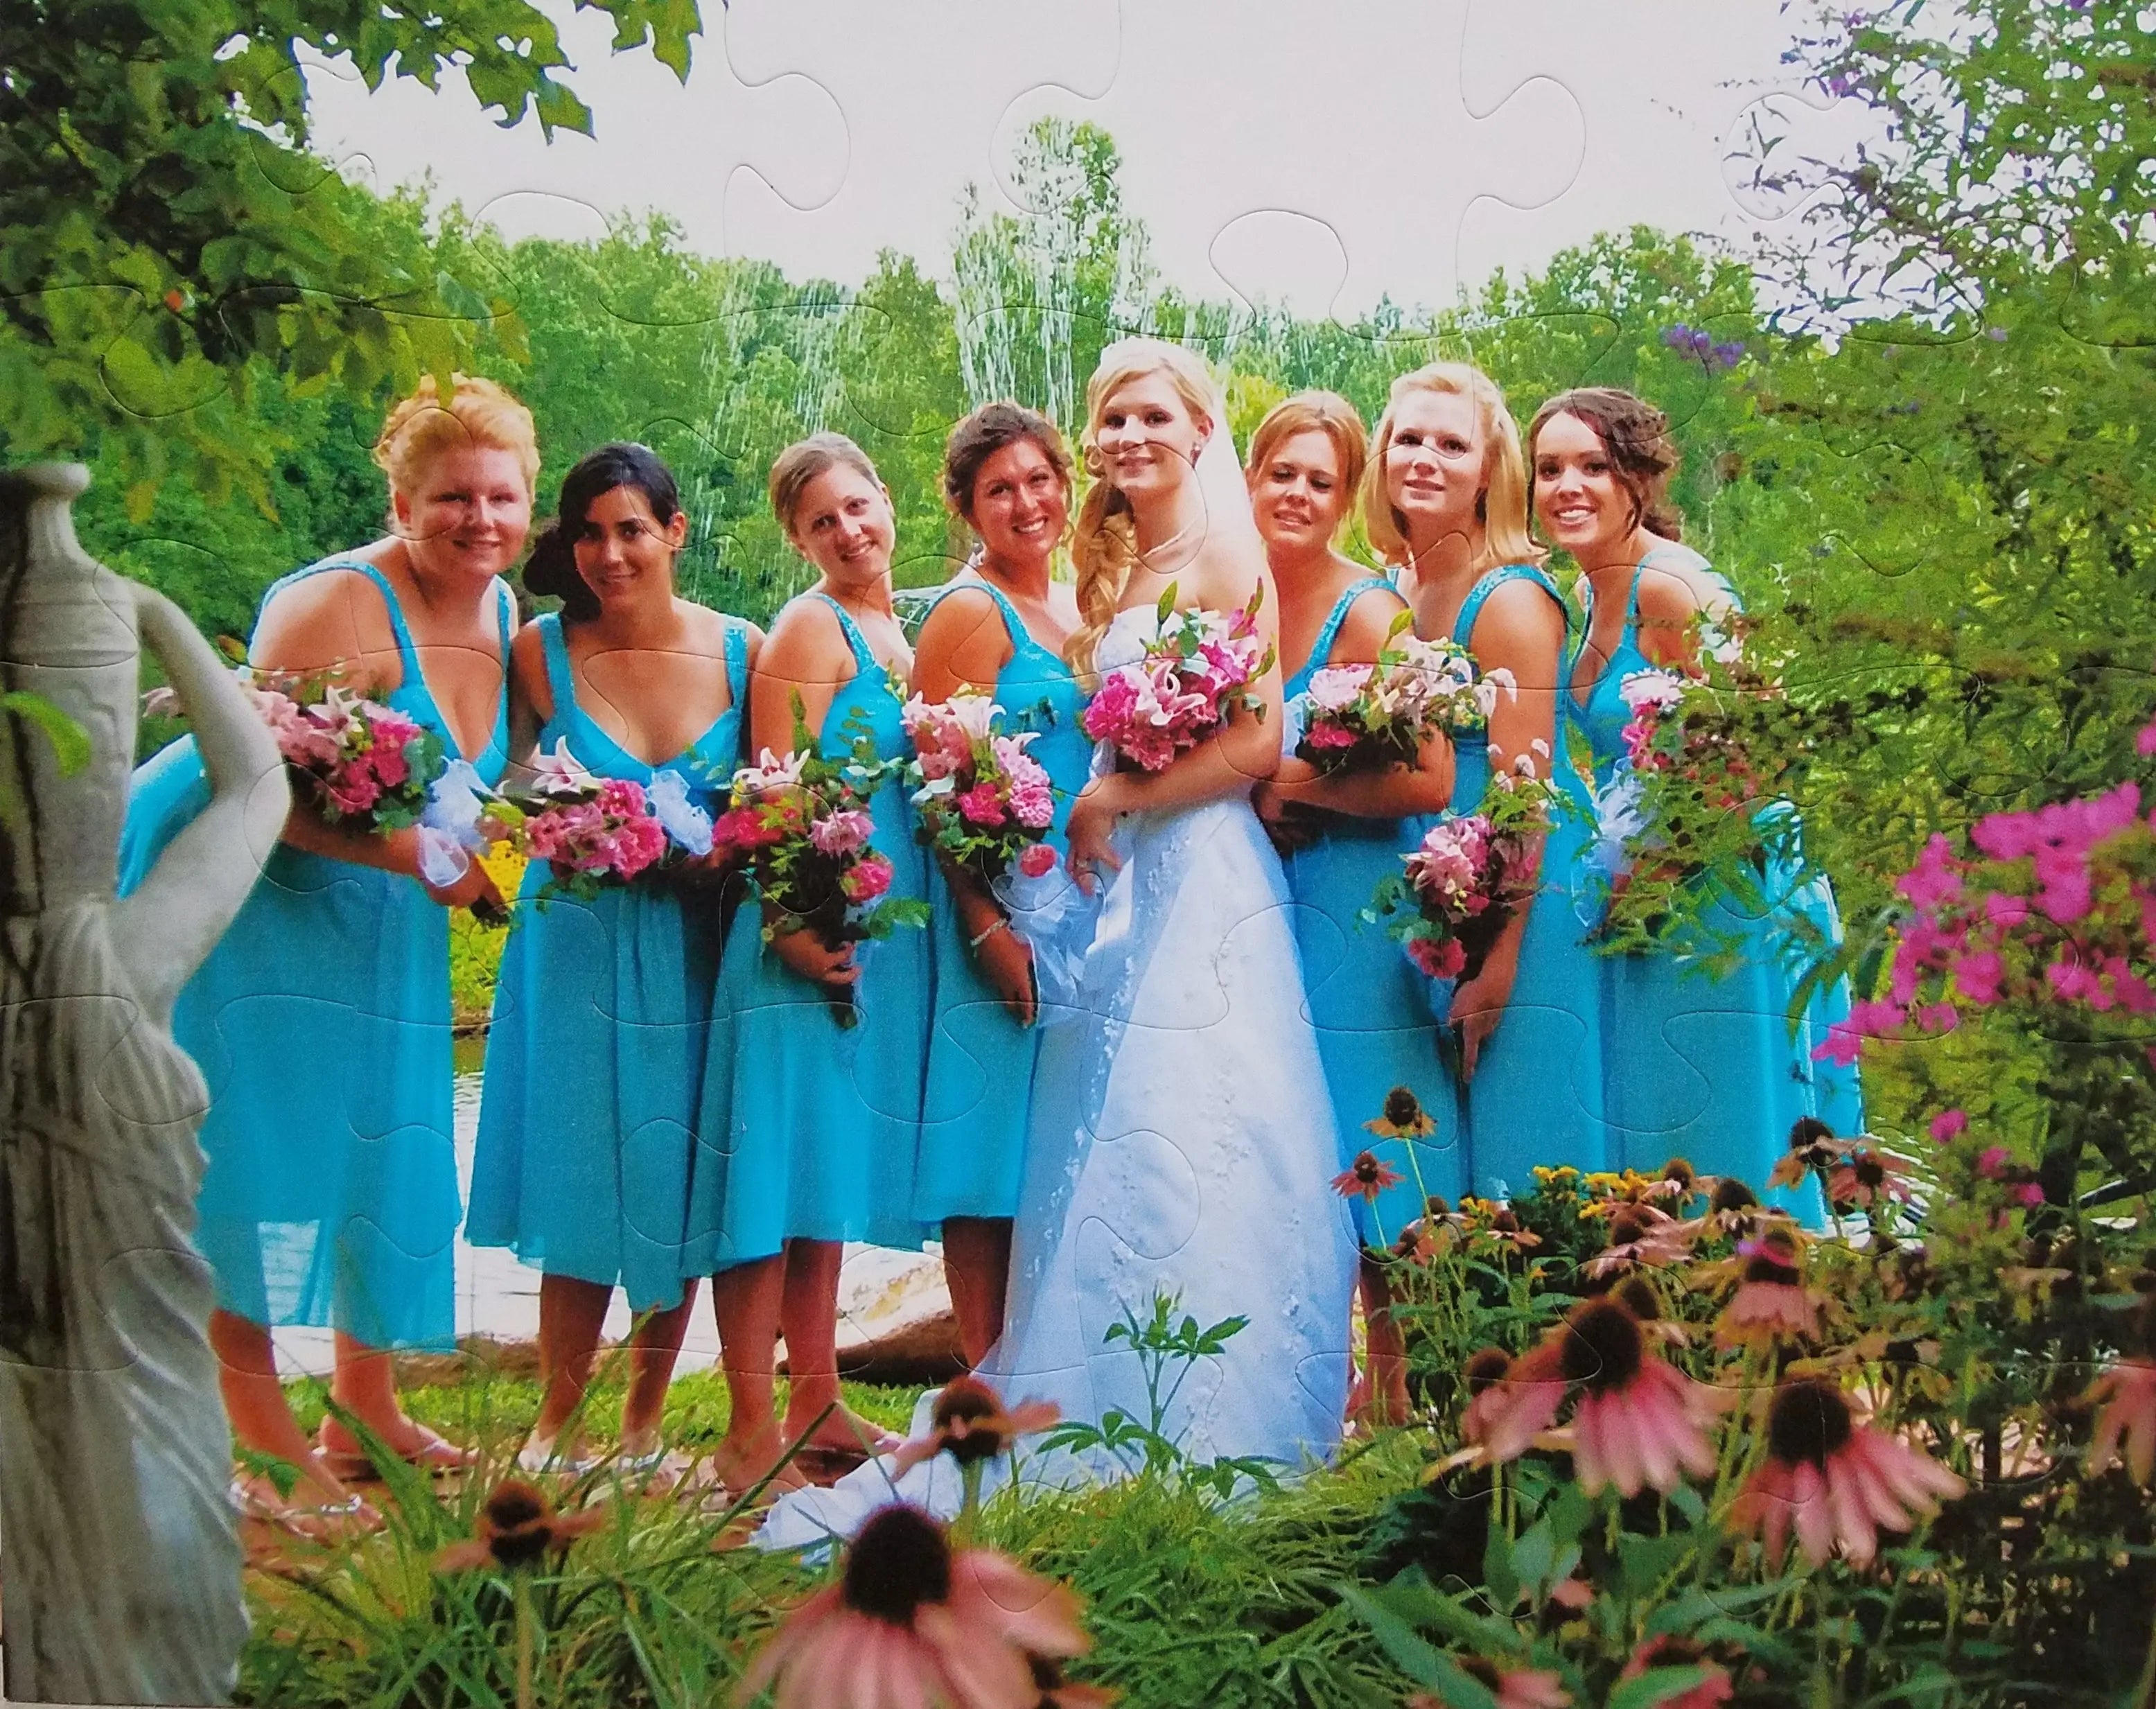 8x10 inch puzzle cut of bridesmaids wearing blue at wedding from The Missing Piece Puzzle Company